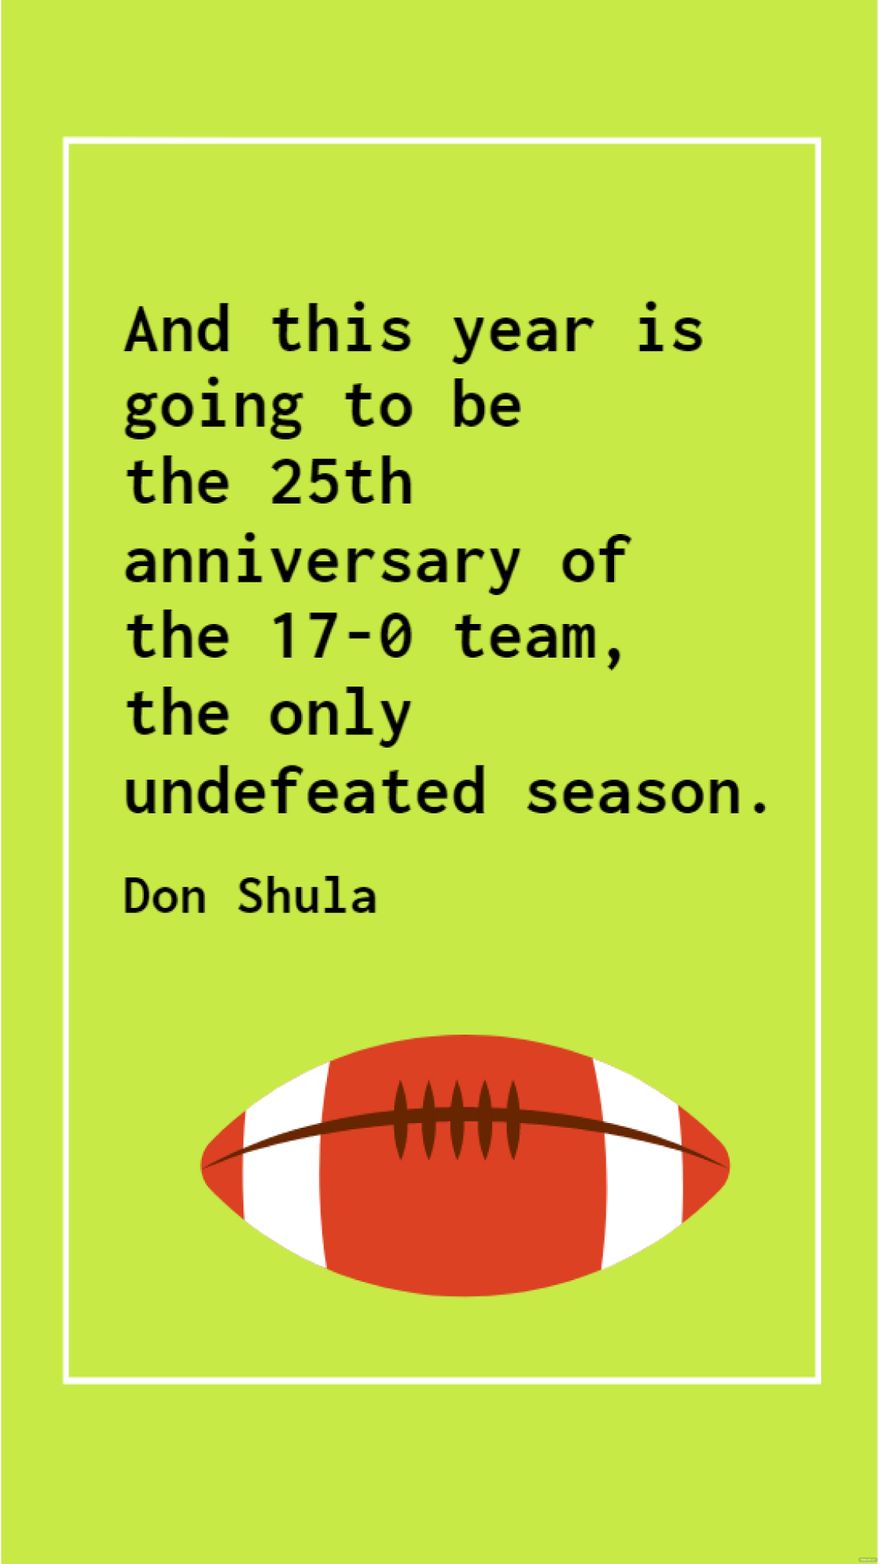 Free Don Shula - And this year is going to be the 25th anniversary of the 17-0 team, the only undefeated season. in JPG